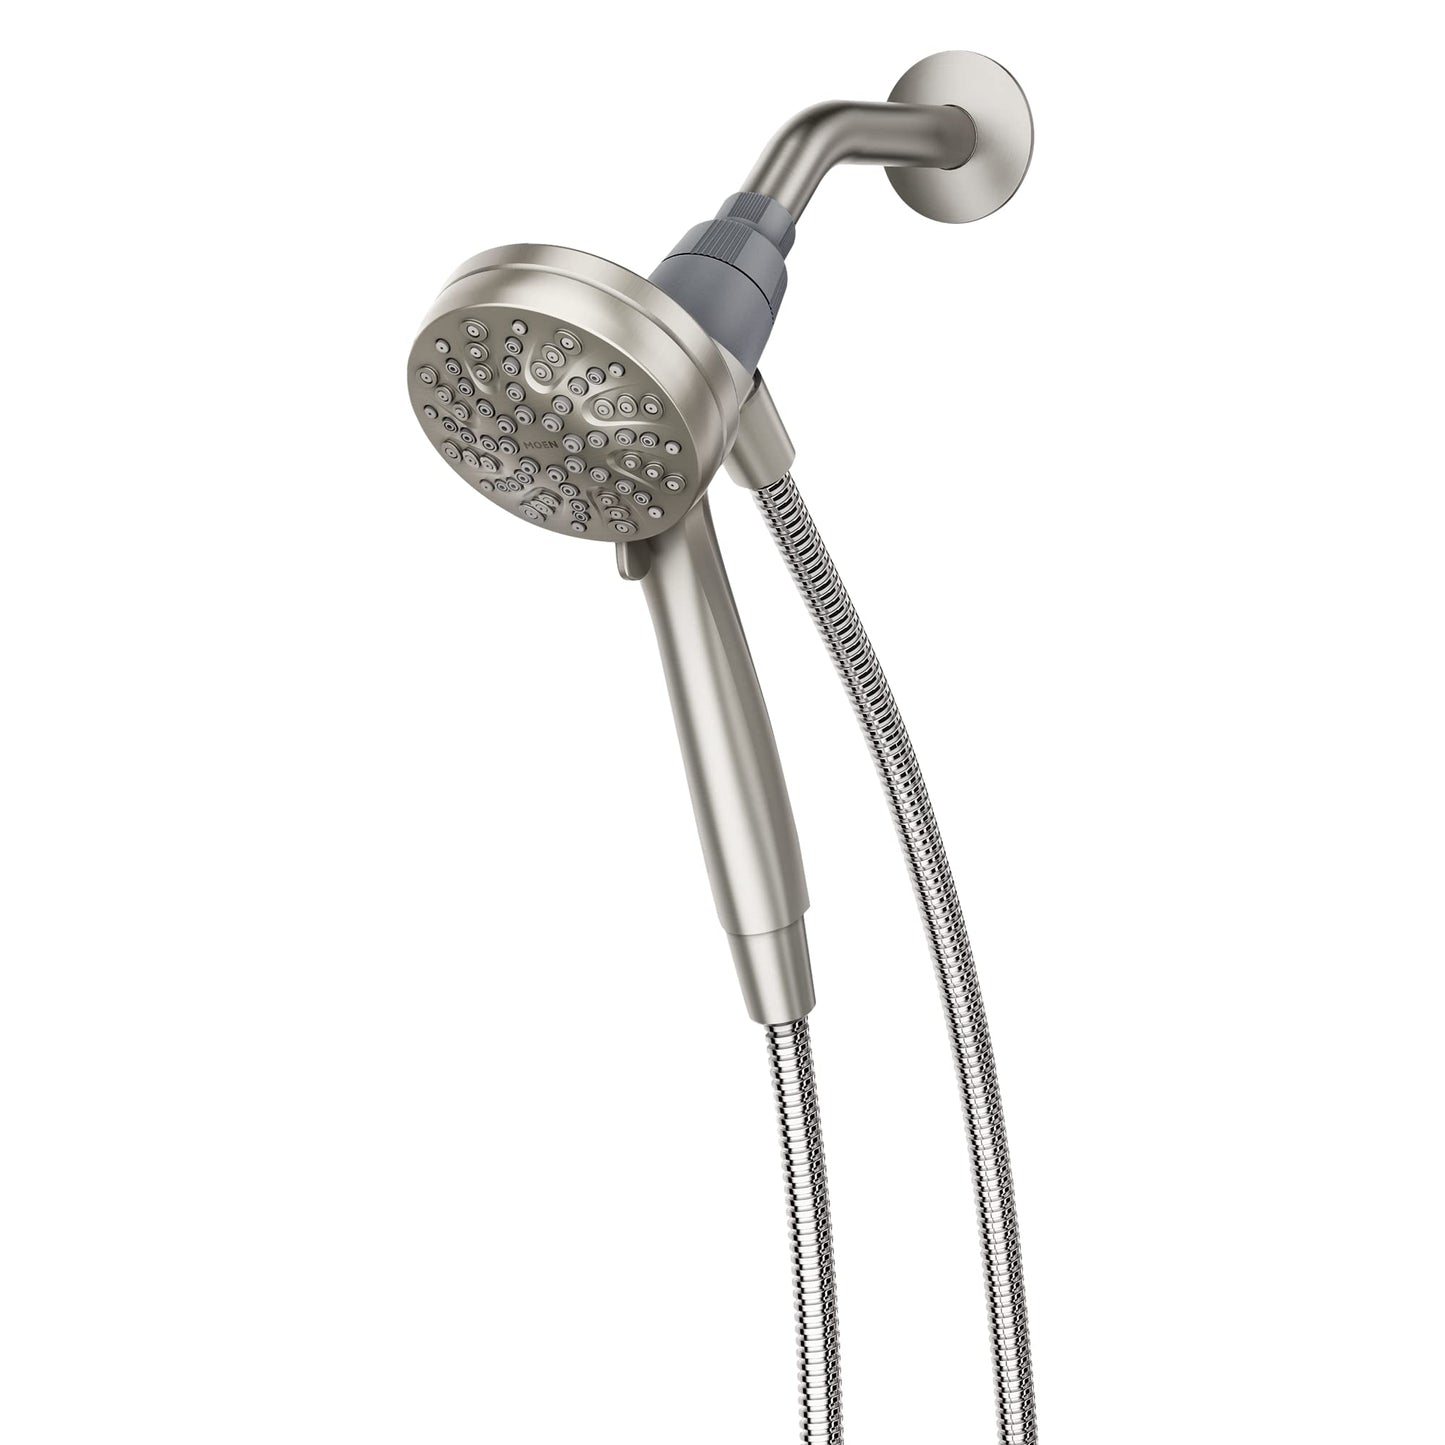 Moen Engage Magnetix Spot Resist Brushed Nickel 3.5-Inch Six-Function Eco-Performance Handheld Showerhead with Magnetic Docking System for Bathroom Shower, 26100SRN - Like New